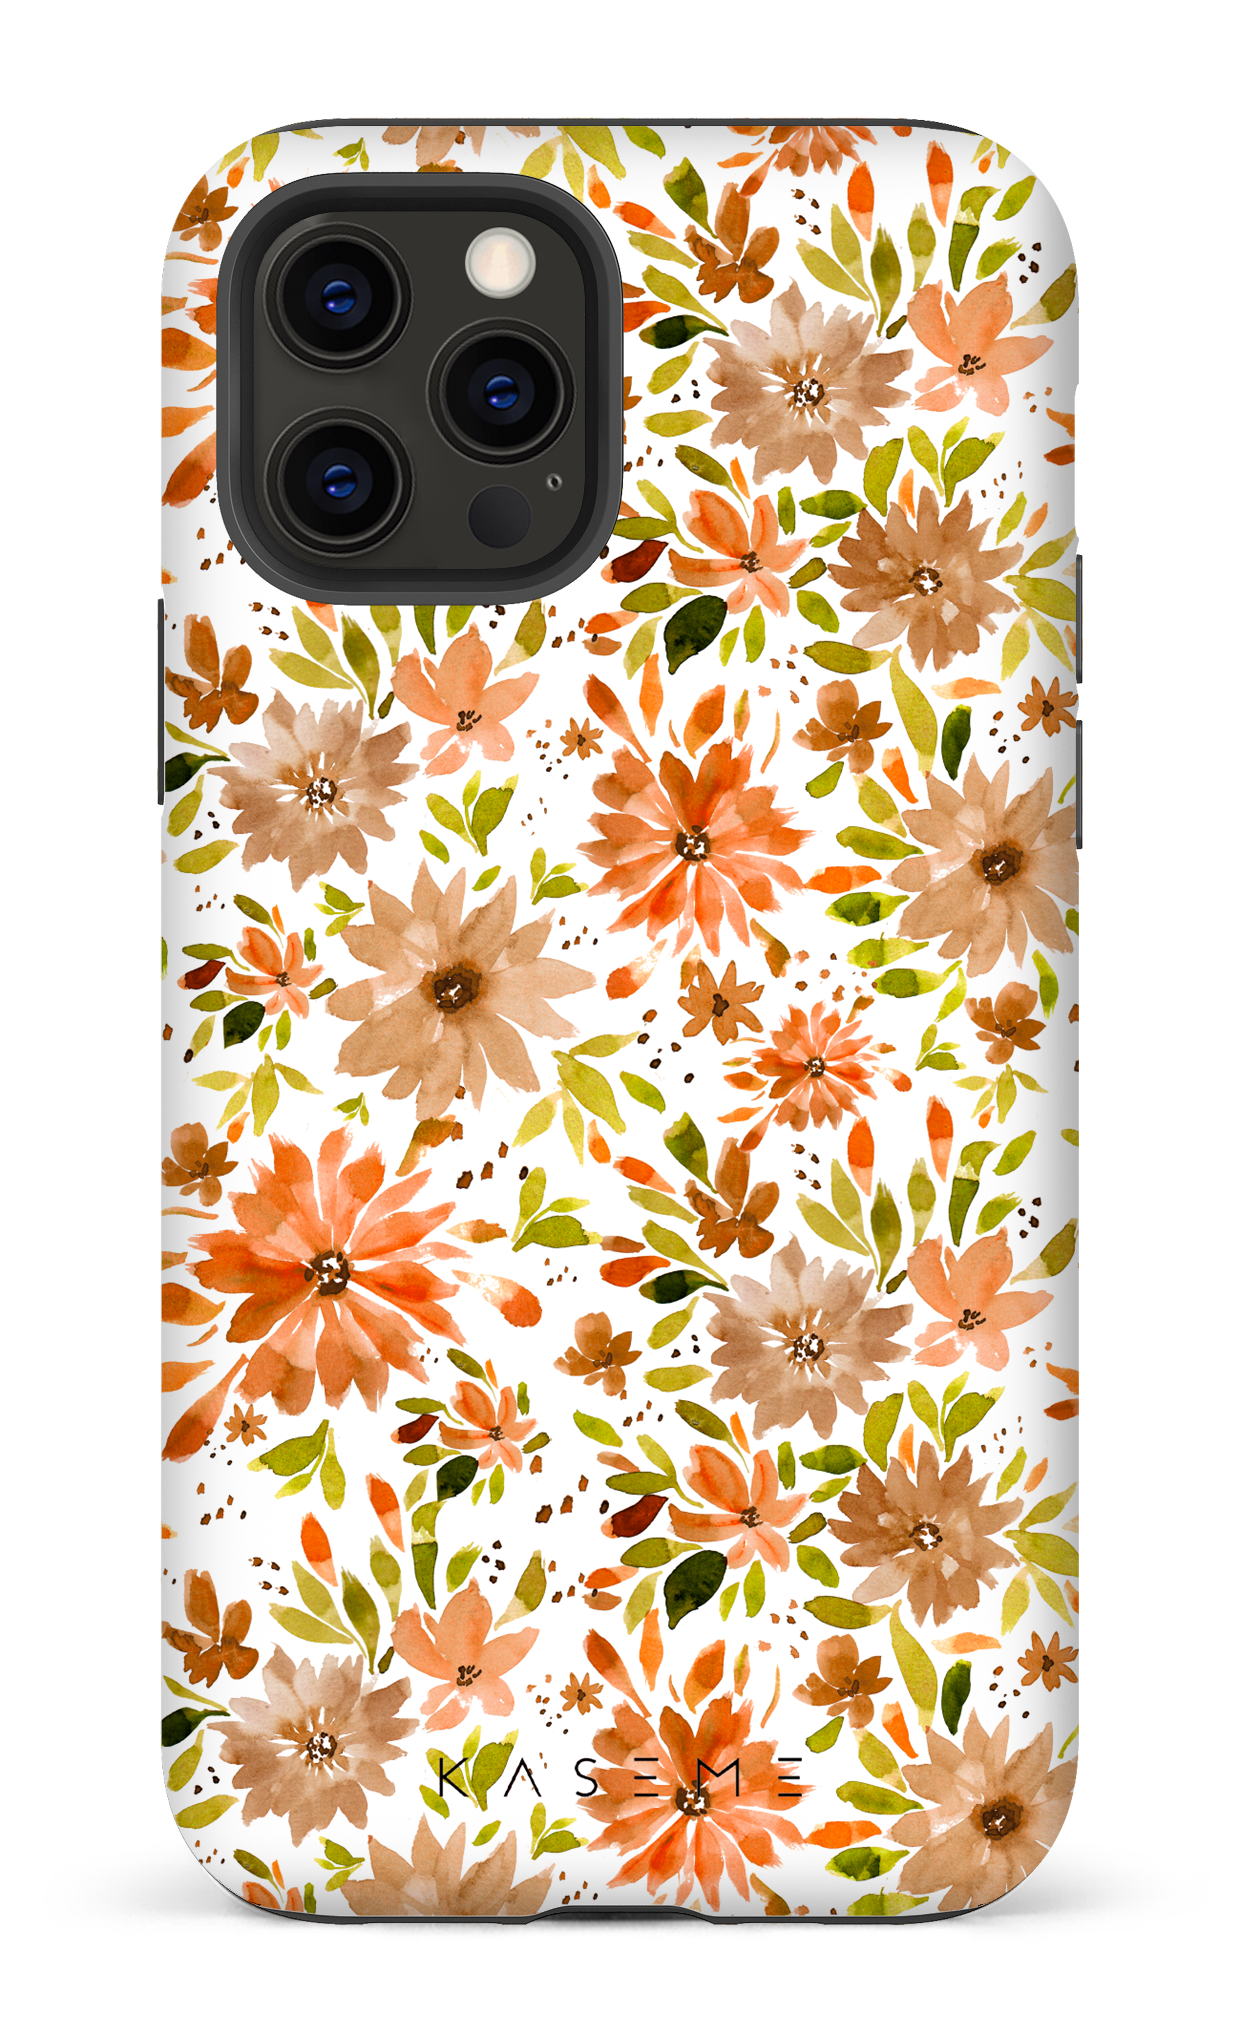 Golden Harvest blooms by ﻿ Zohra designs - iPhone 12 Pro